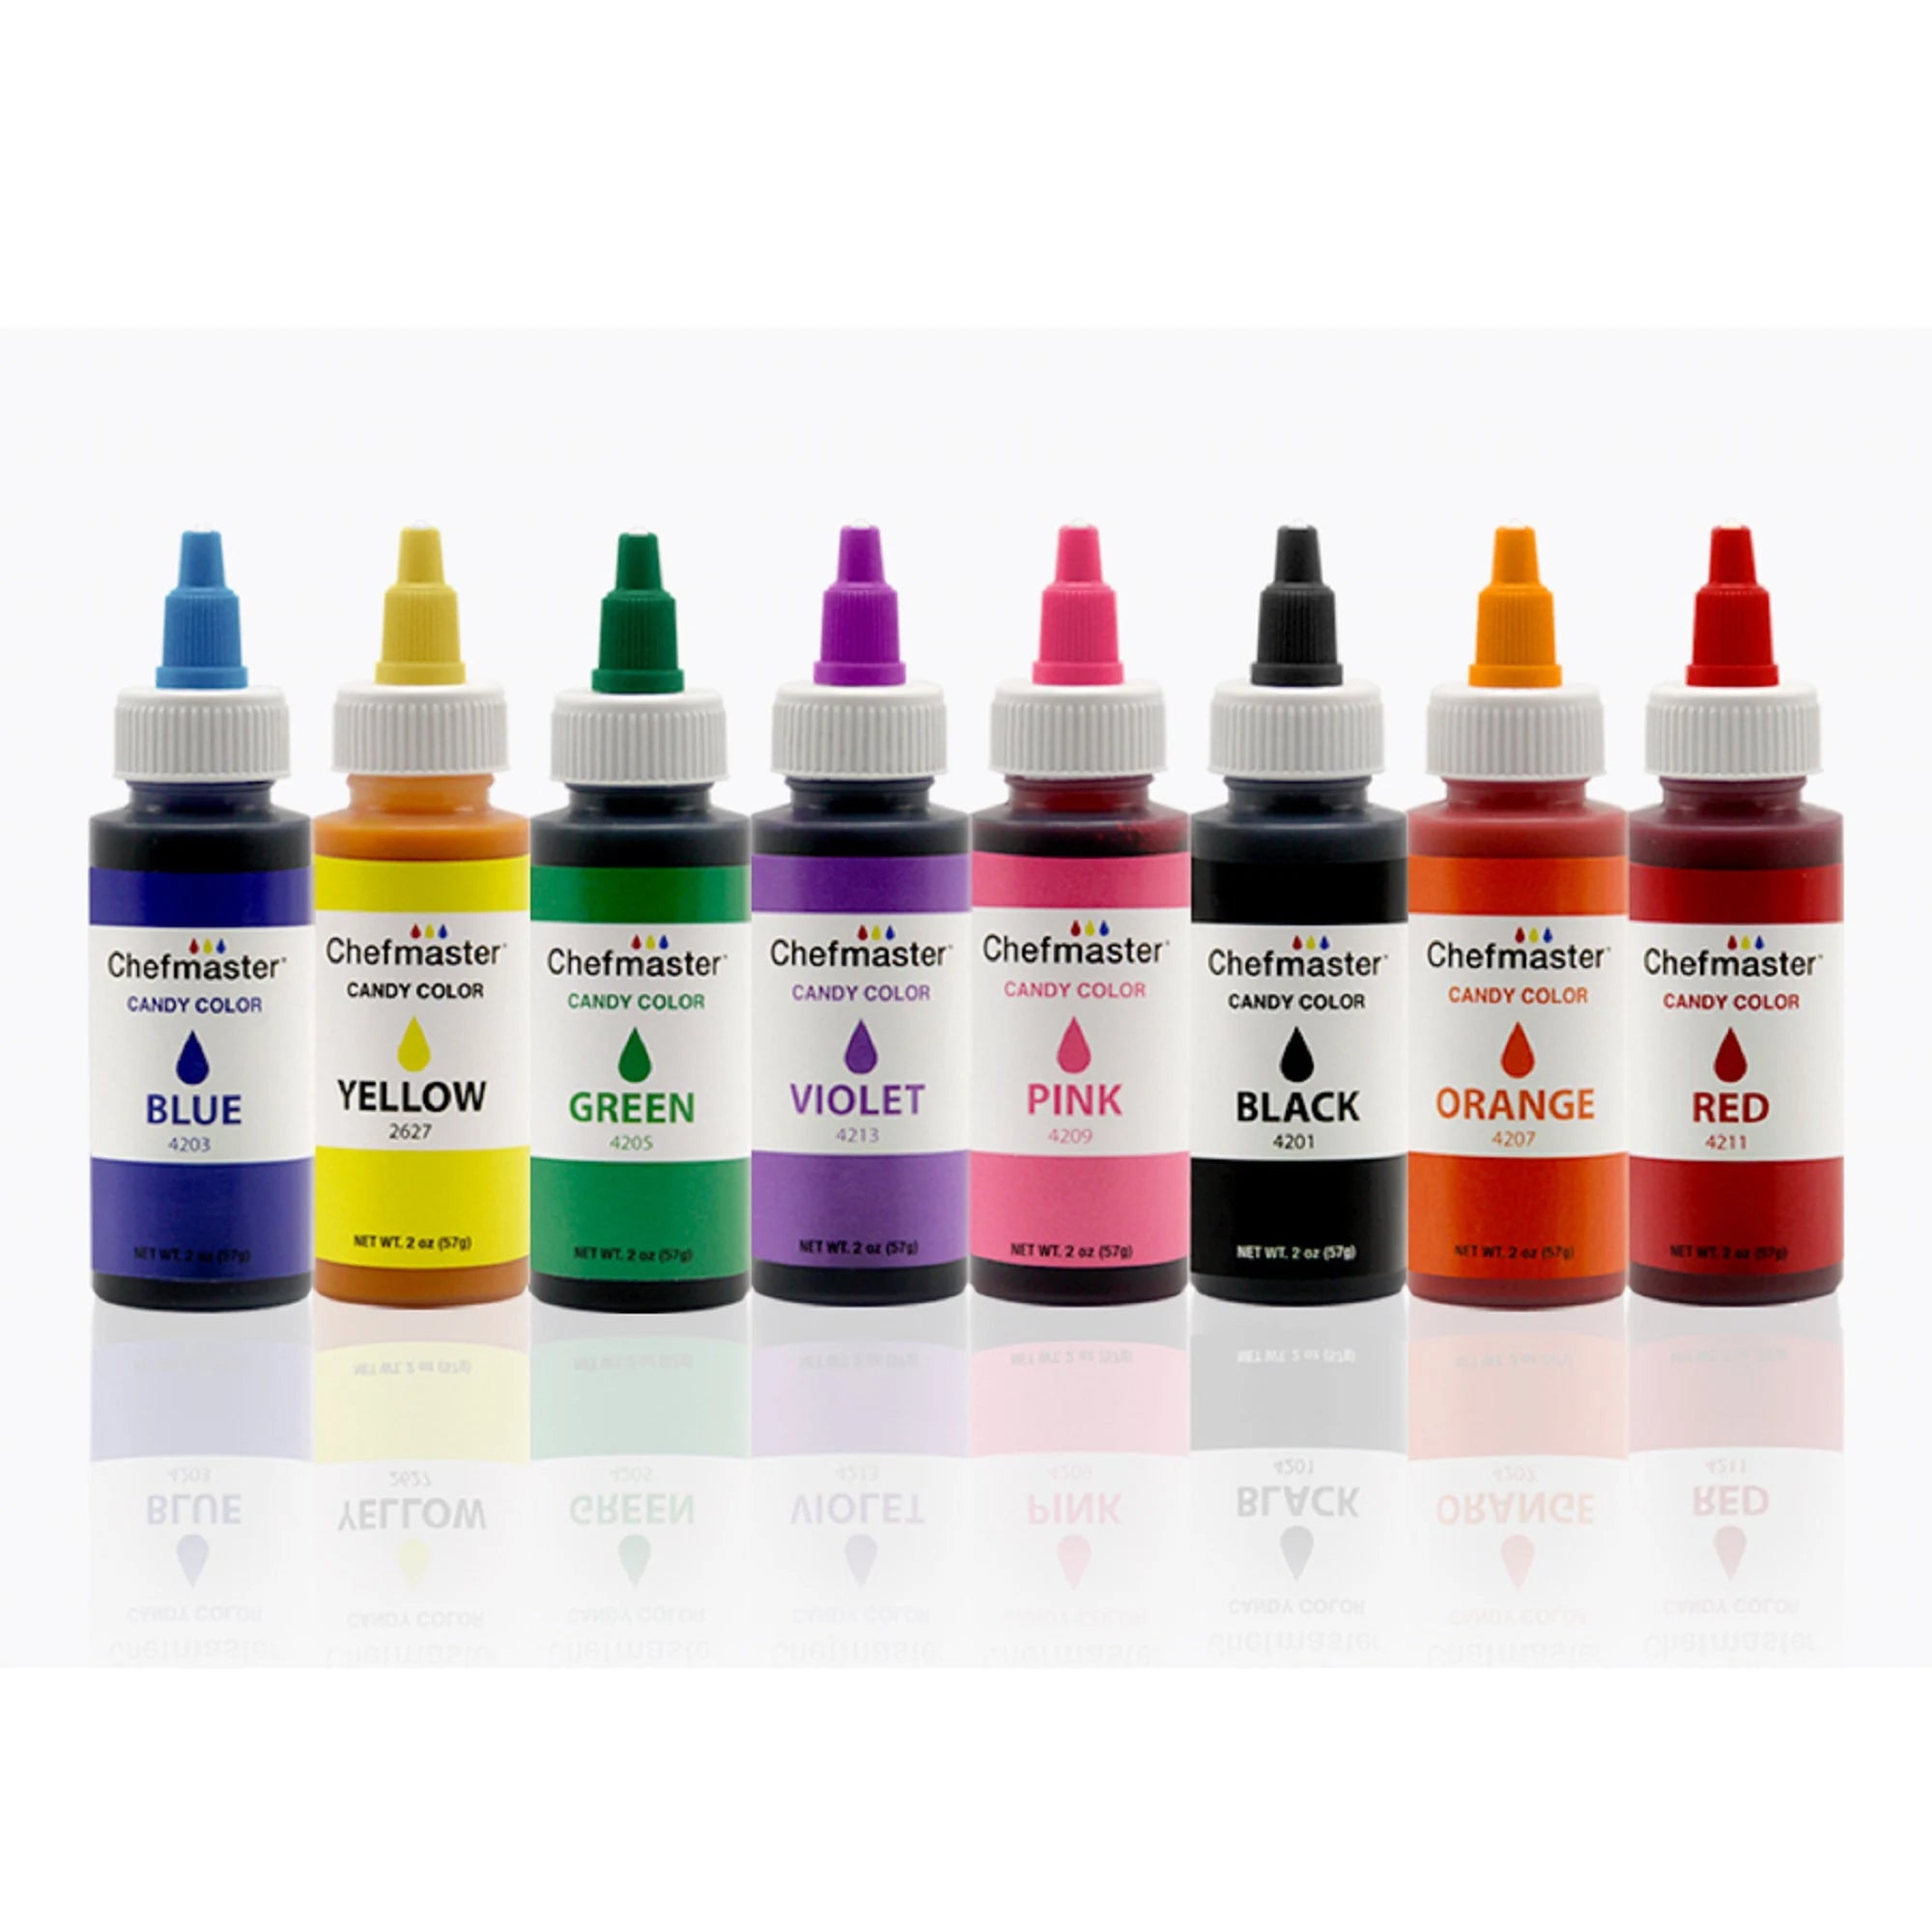 Shop Colour Mill Oil Based Food Coloring: Tons of Candy Colors – Sprinkle  Bee Sweet